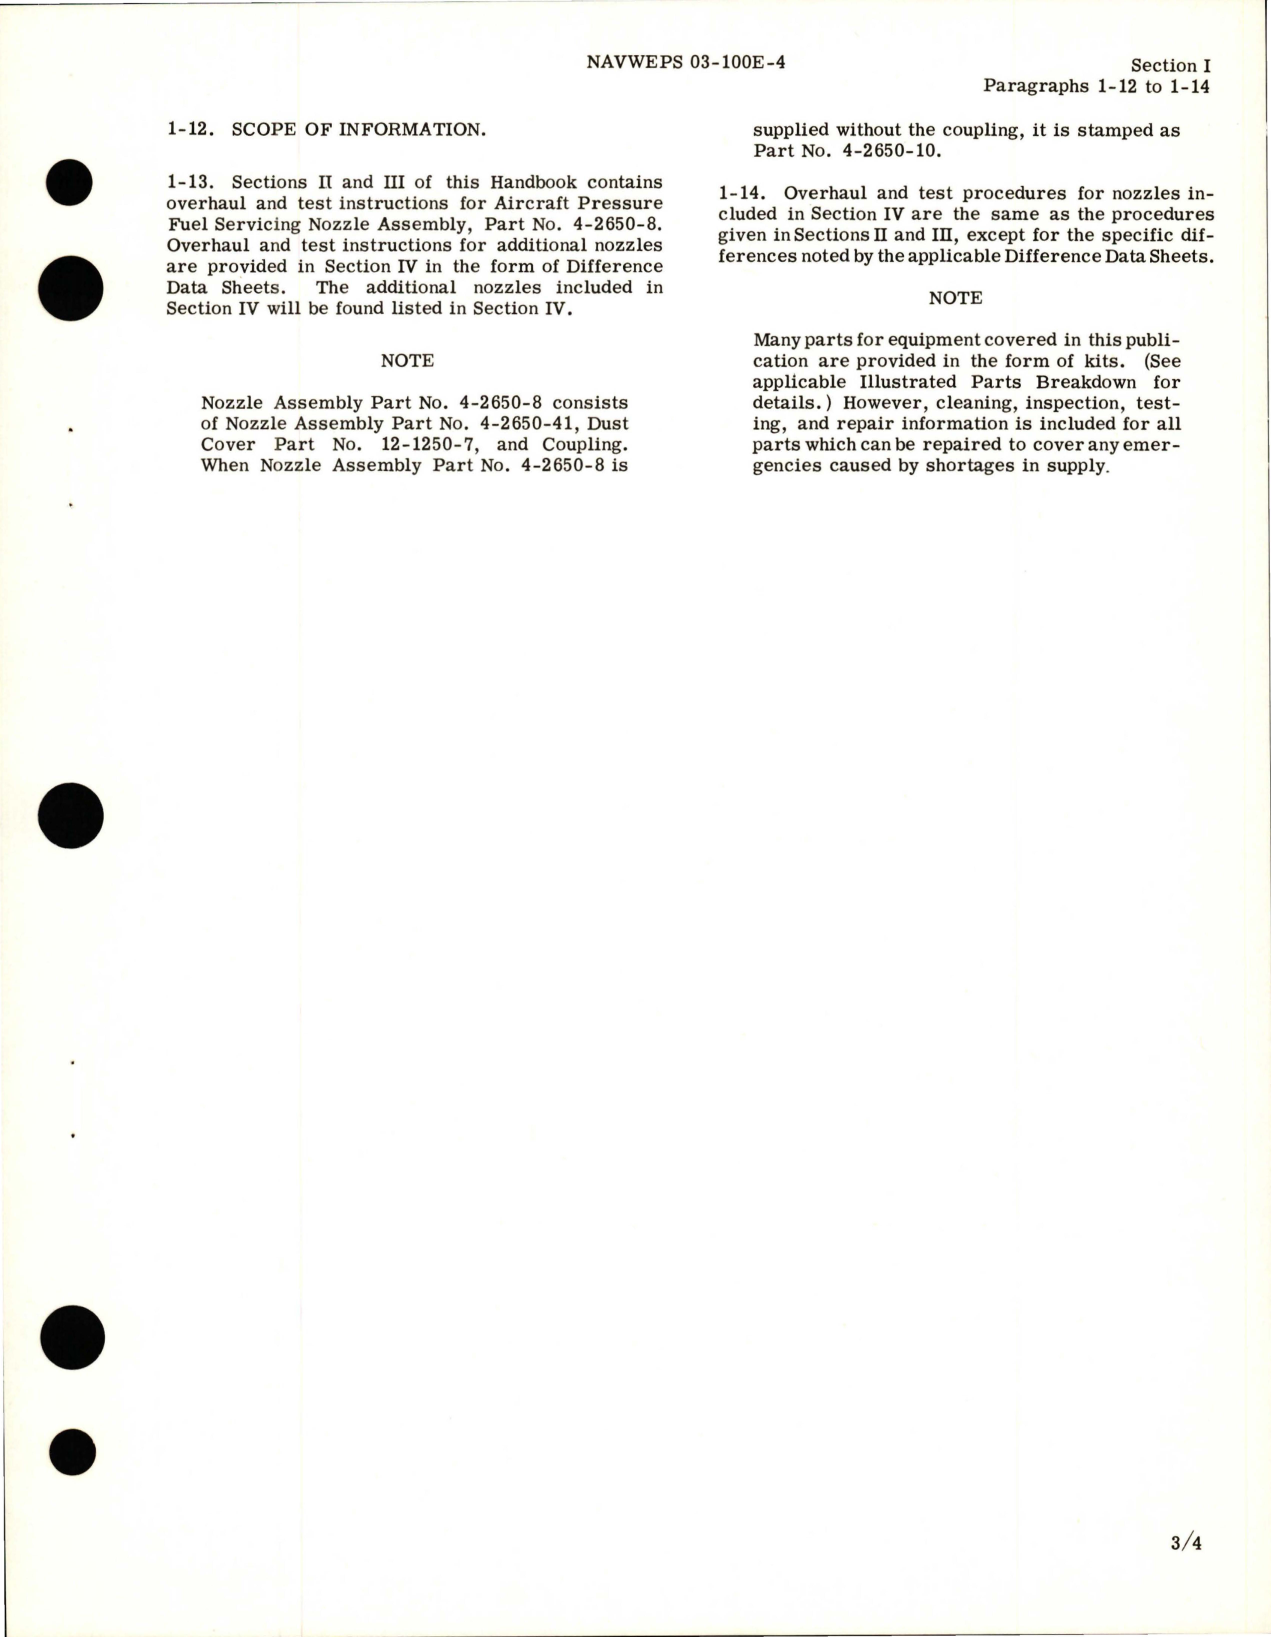 Sample page 7 from AirCorps Library document: Overhaul Instructions for Pressure Fuel Servicing Nozzles 